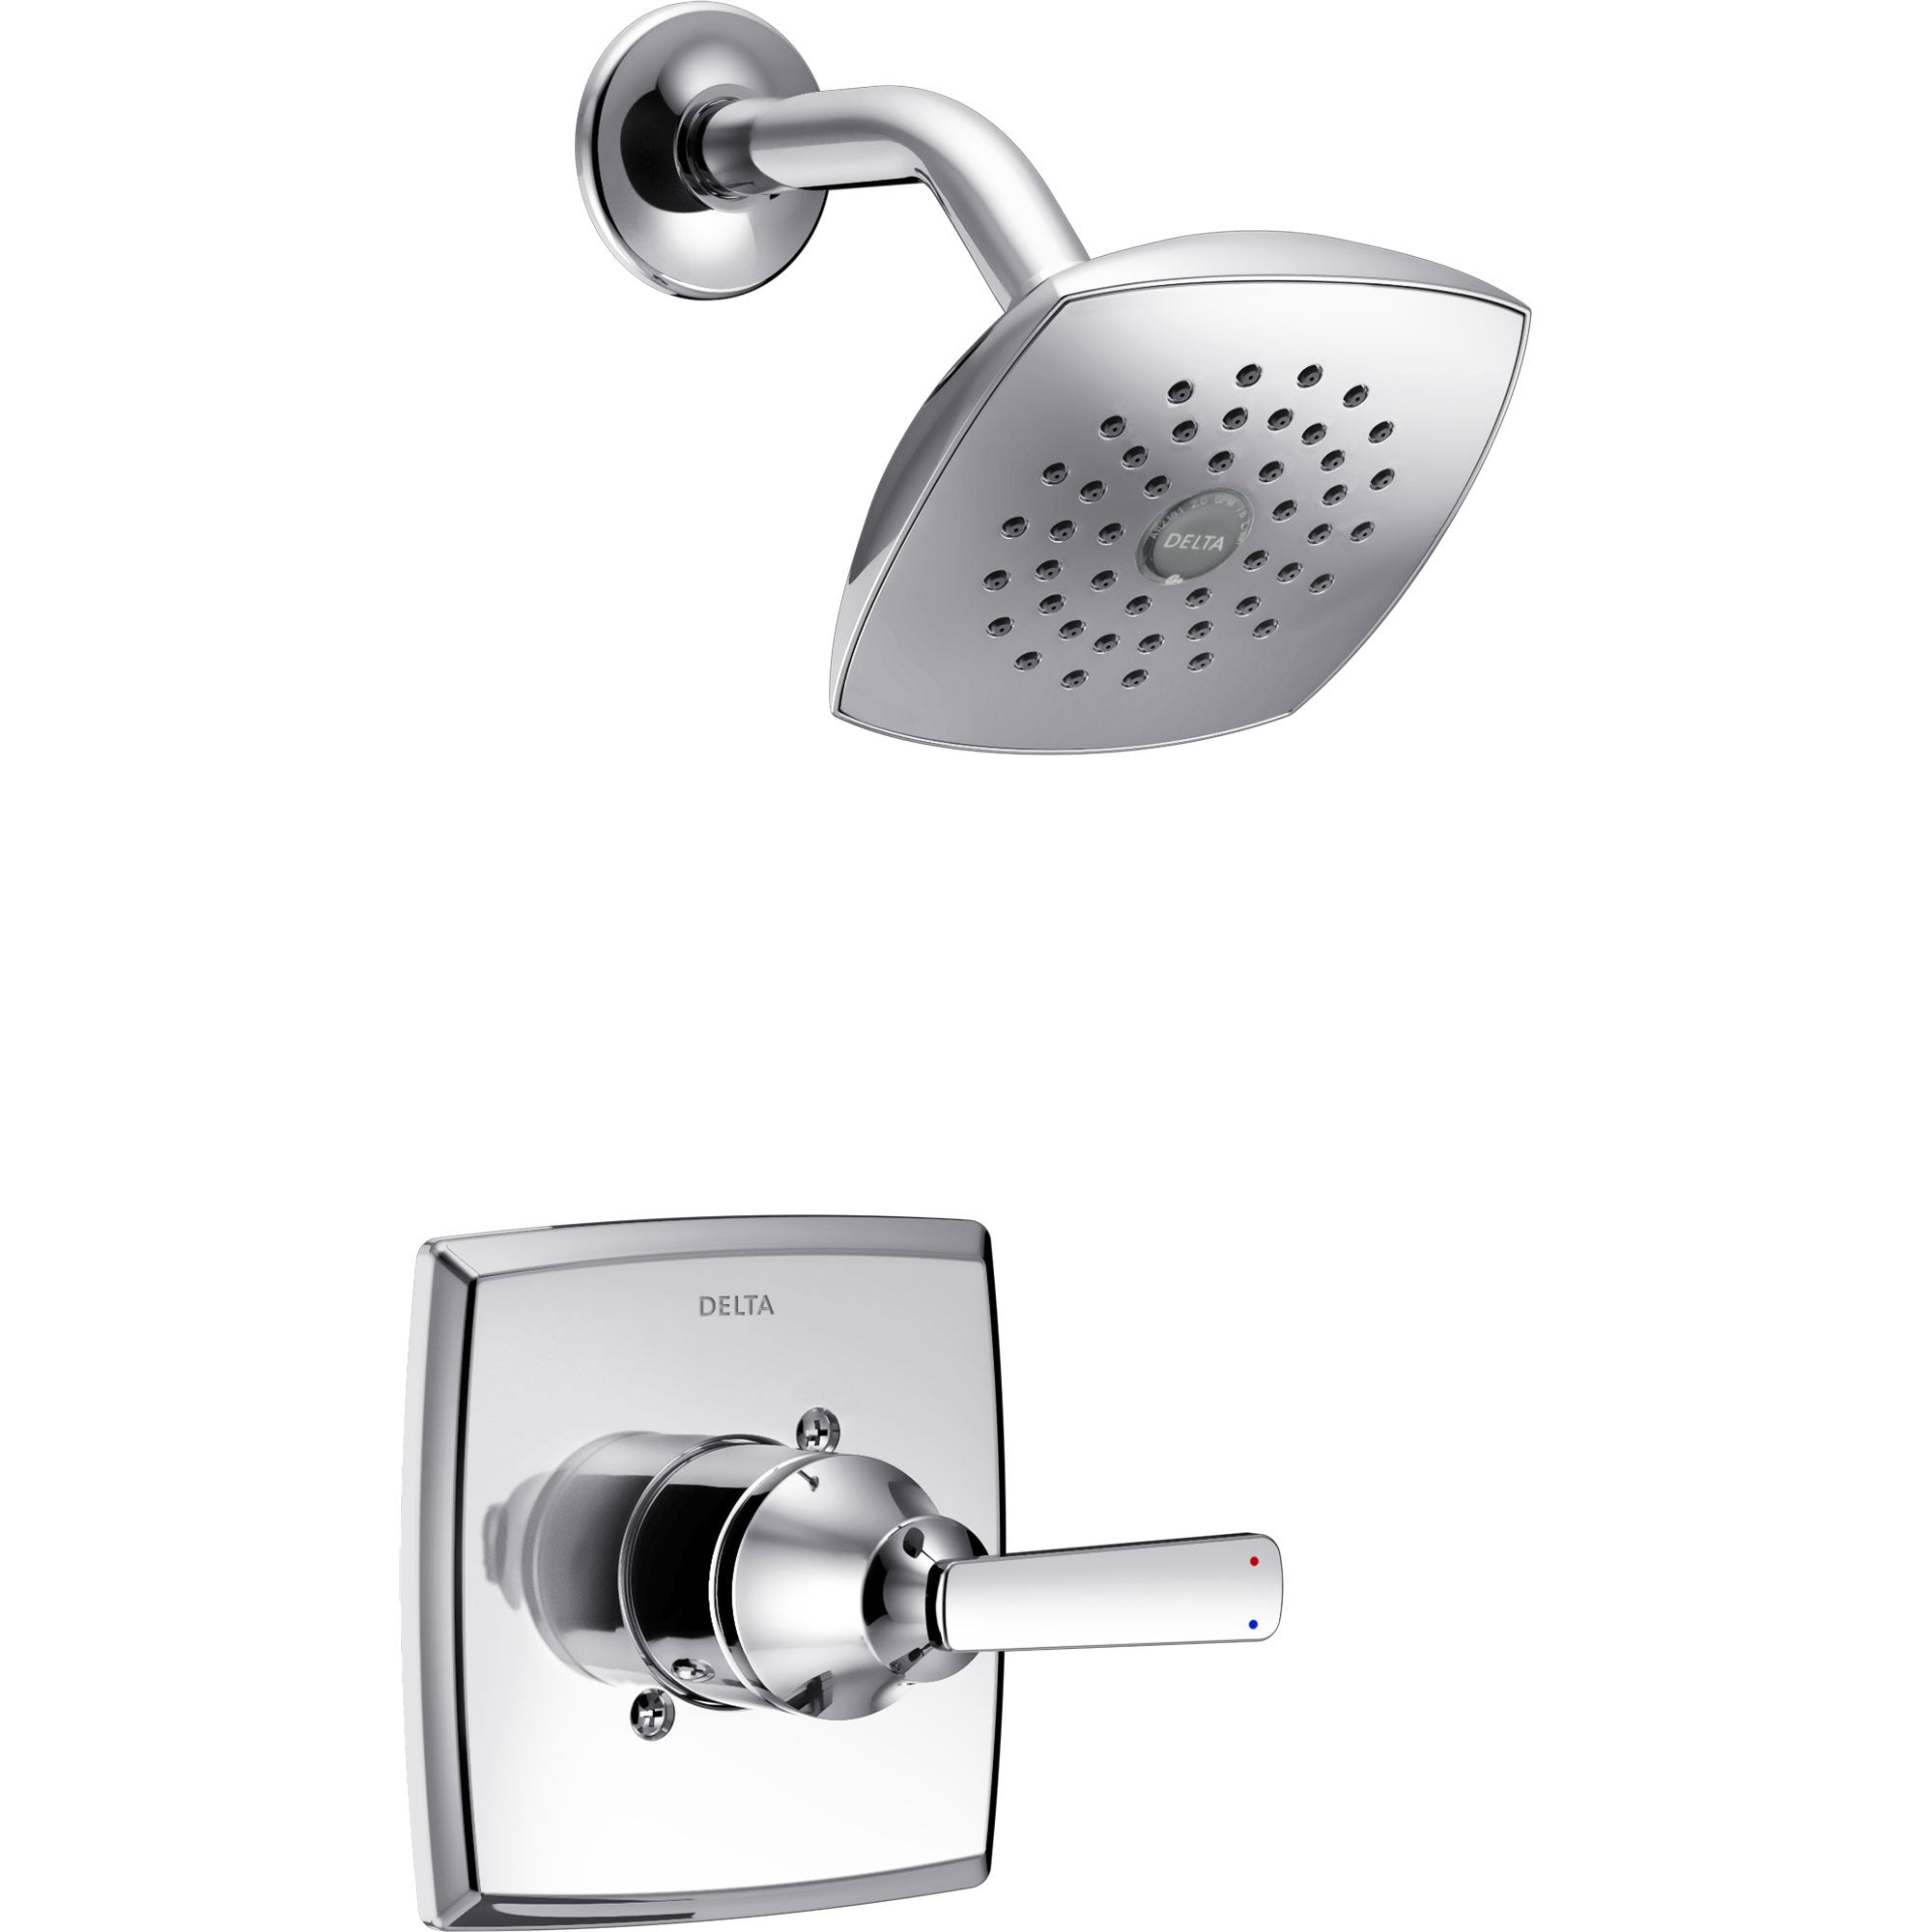 Delta Ashlyn Modern 14 Series Watersense Chrome Finish Single Handle Shower Only Faucet INCLUDES Rough-in Valve D1234V